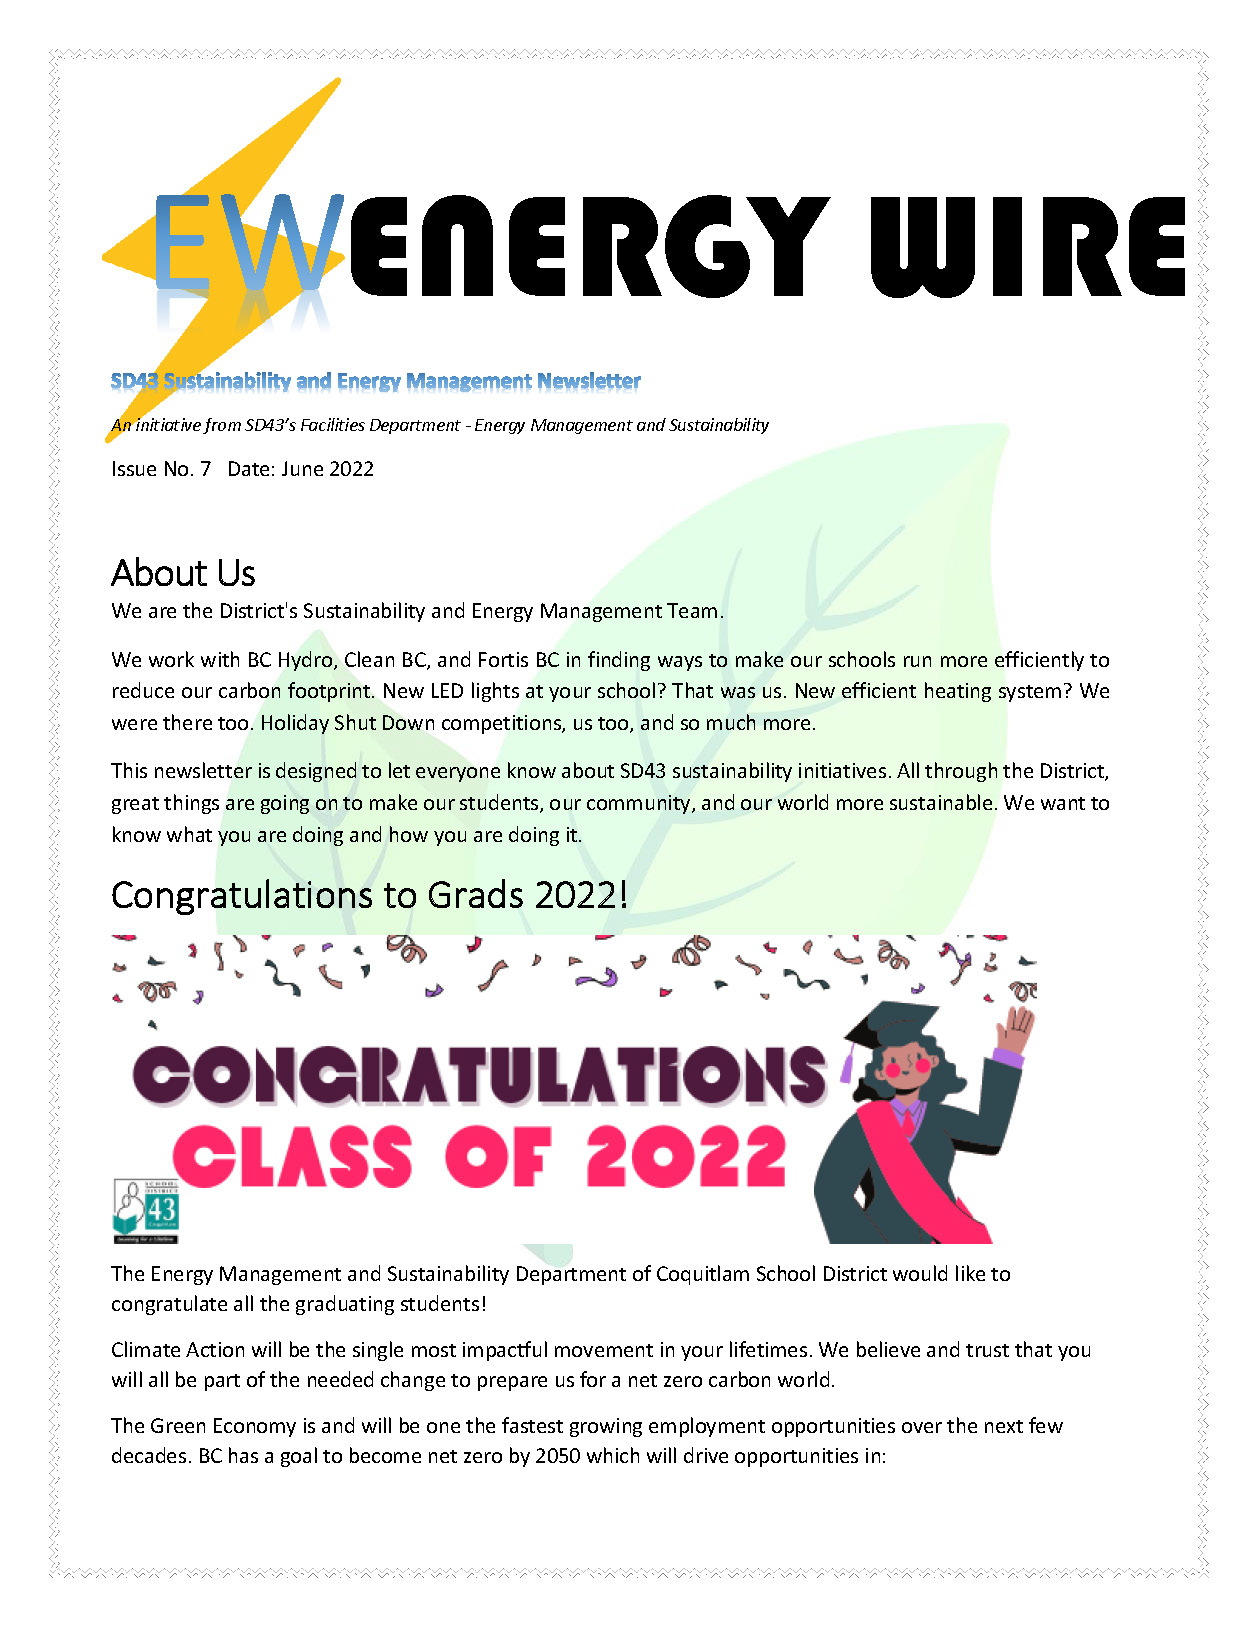 Energy Wire Newsletter (June)_Page_1.jpg